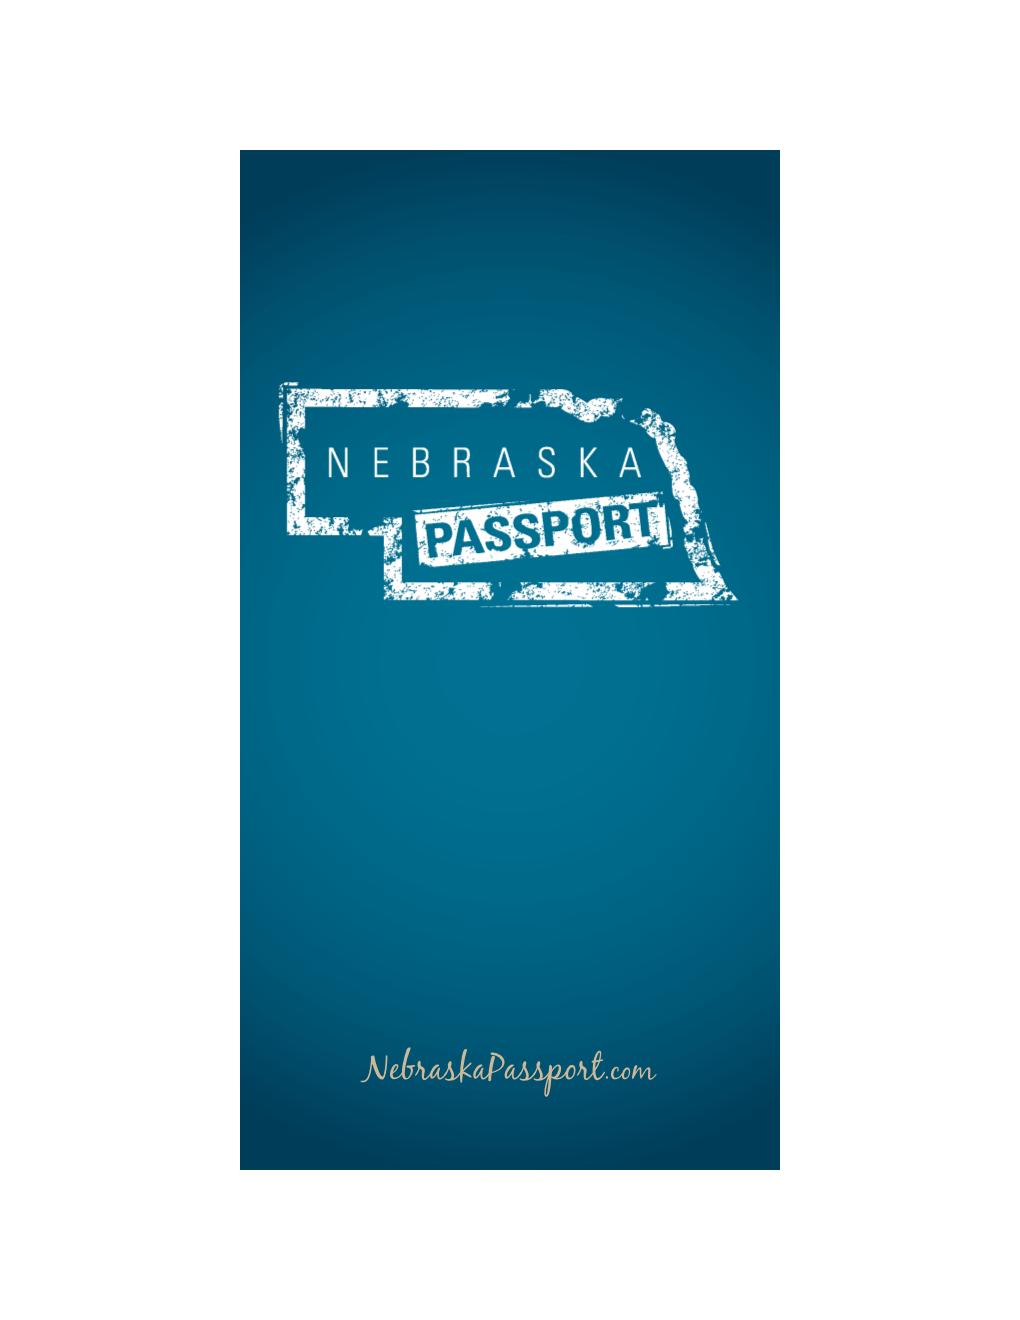 Nebraskapassport.Com When You Visit Any of the Attractions Listed Inside, Be Sure to Get Your Passport Stamped